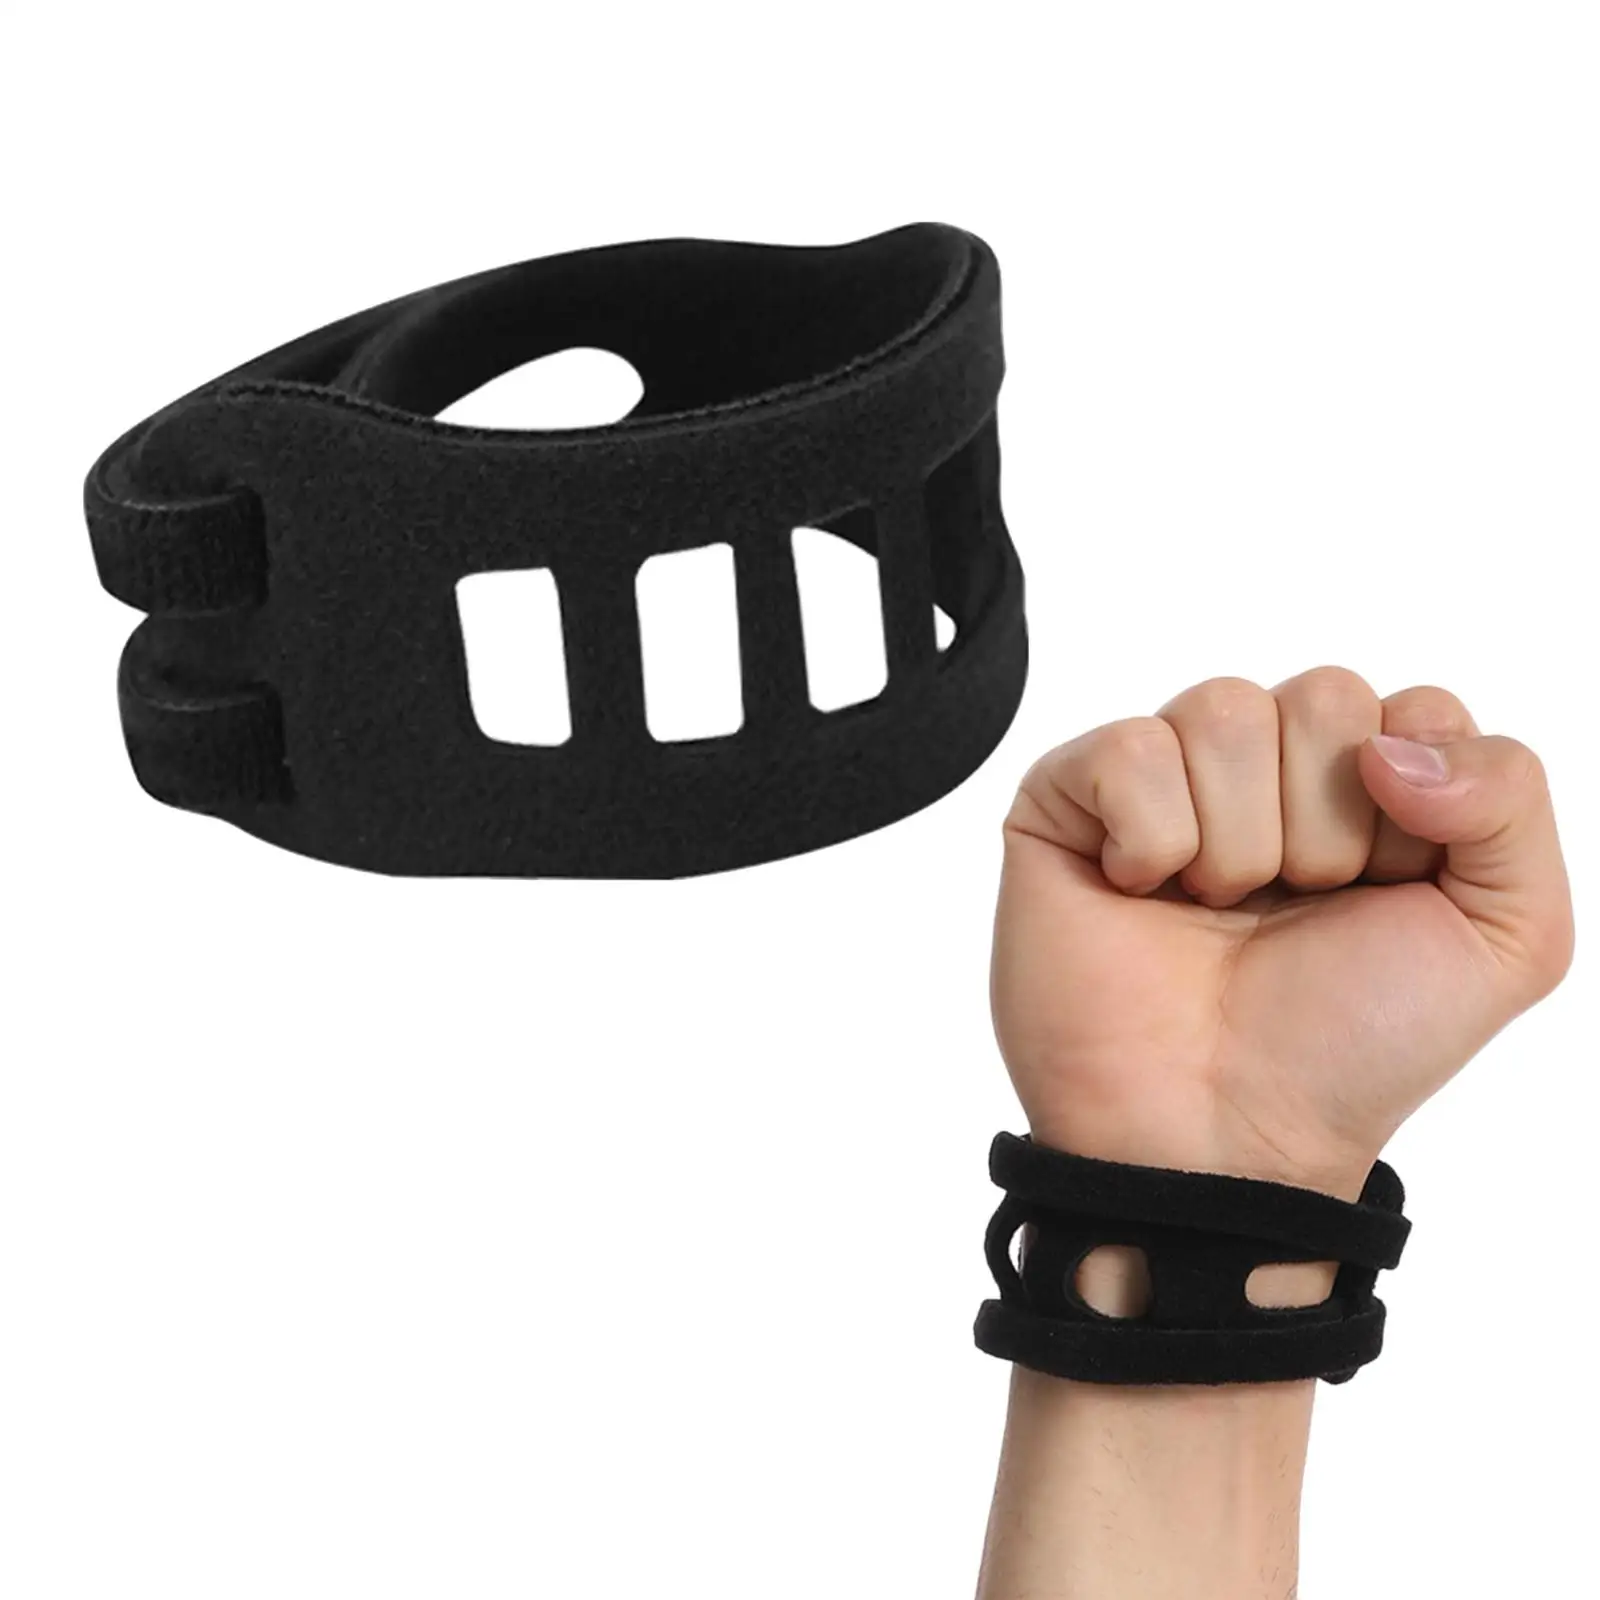 Tfcc Wrist Brace Thin Breathable Sprain Protection Portable Support for Working Out Basketball Fitness Women Men Carpal Tunnel